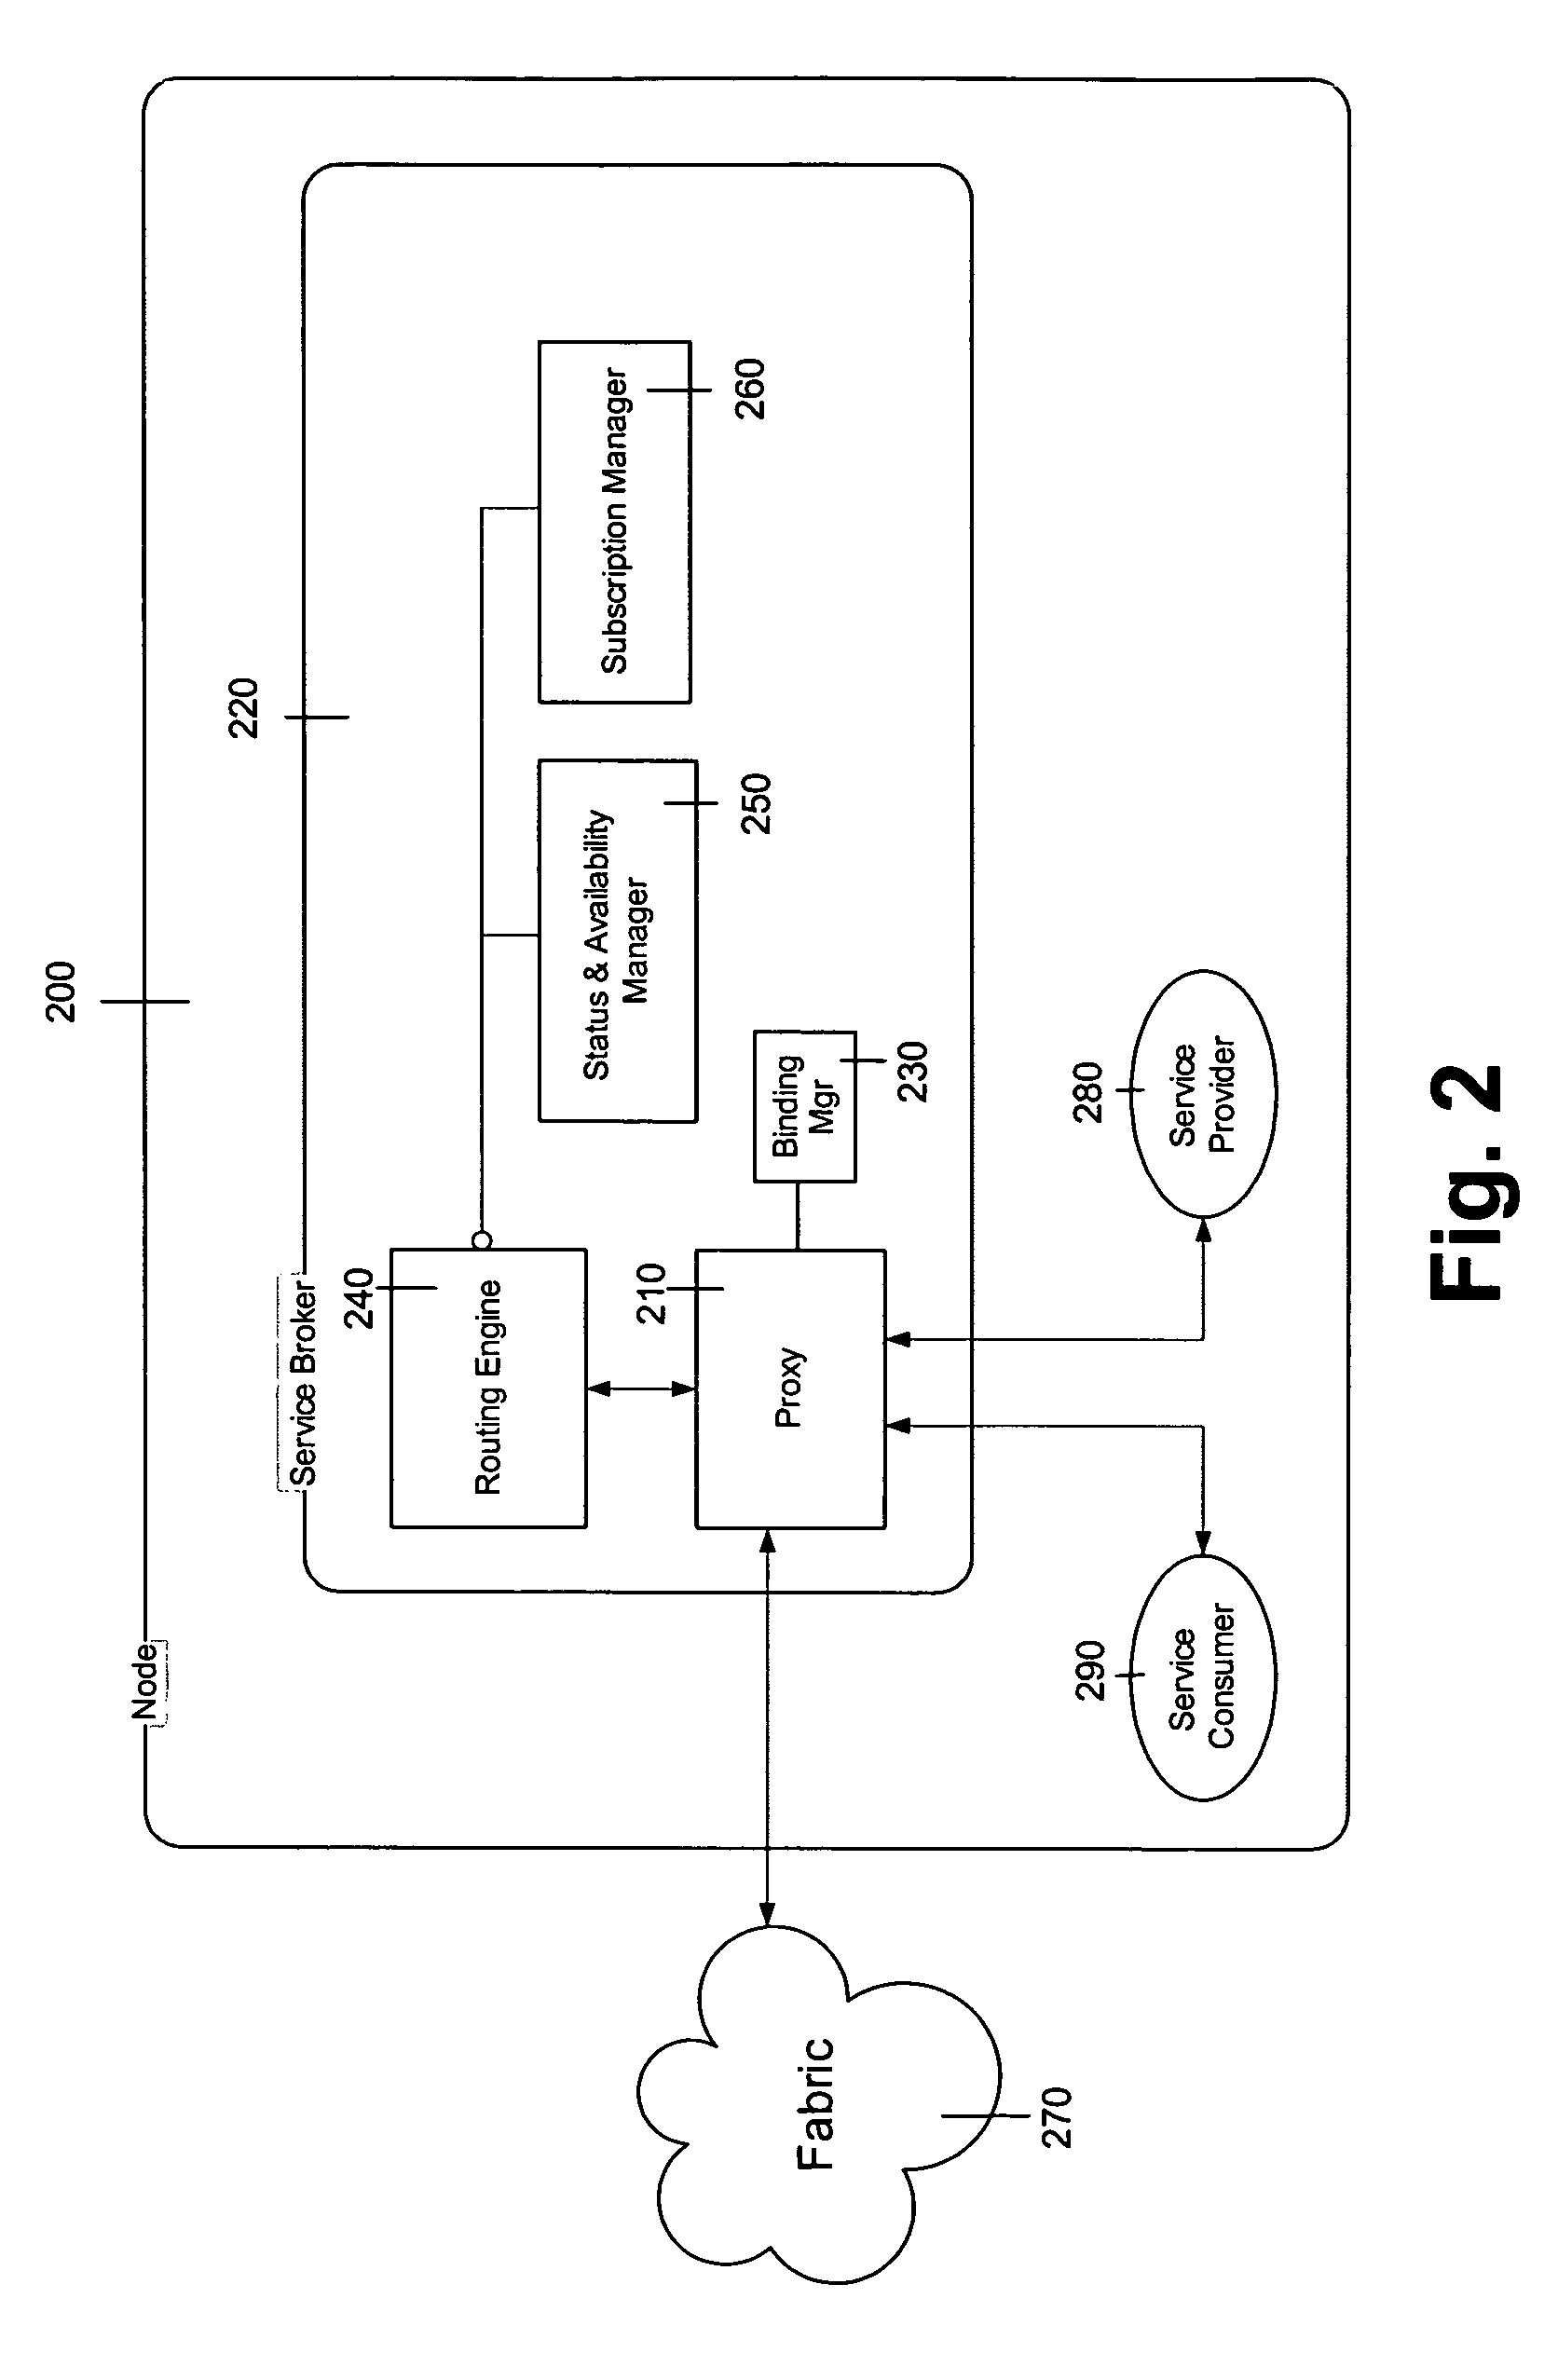 Method and apparatus to accomplish peer-to-peer application data routing between service consumers and service providers within a service oriented architecture